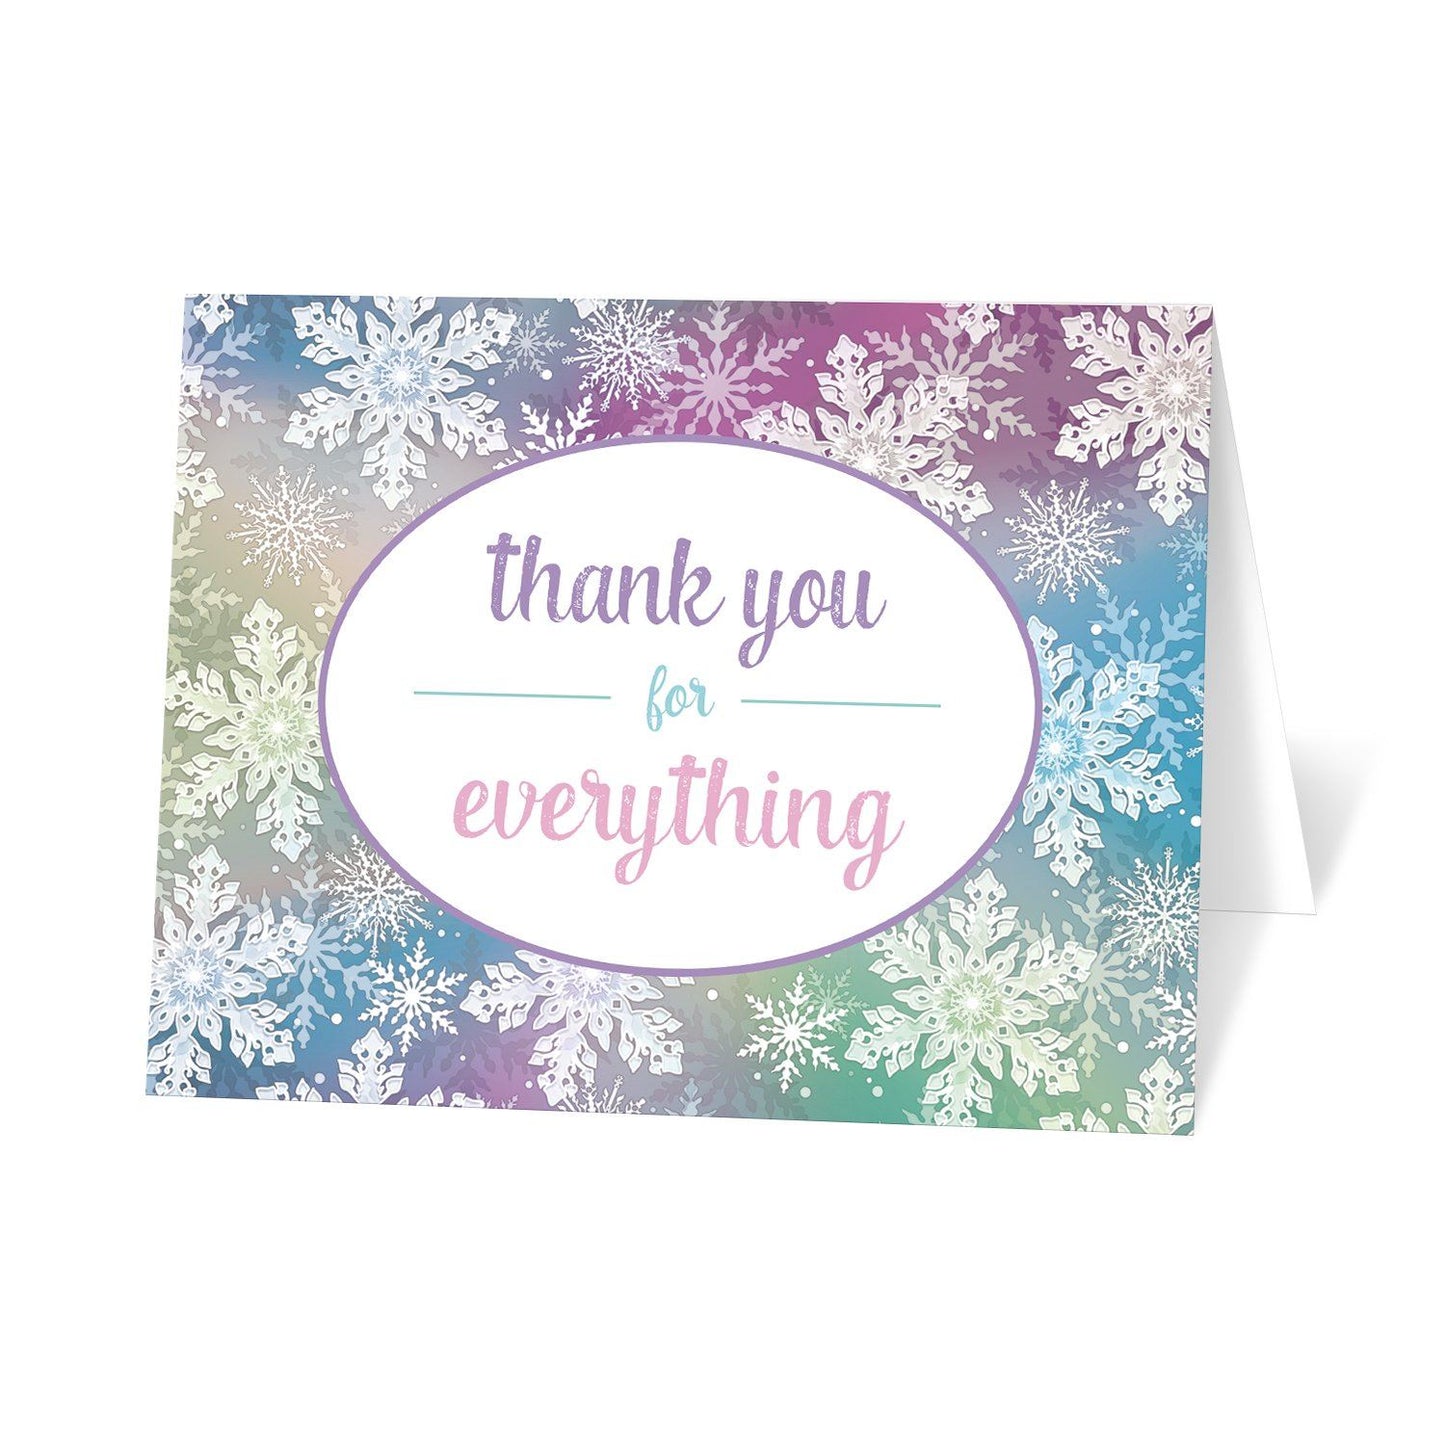 Rainbow Snowflake Winter Thank You Cards at Artistically Invited